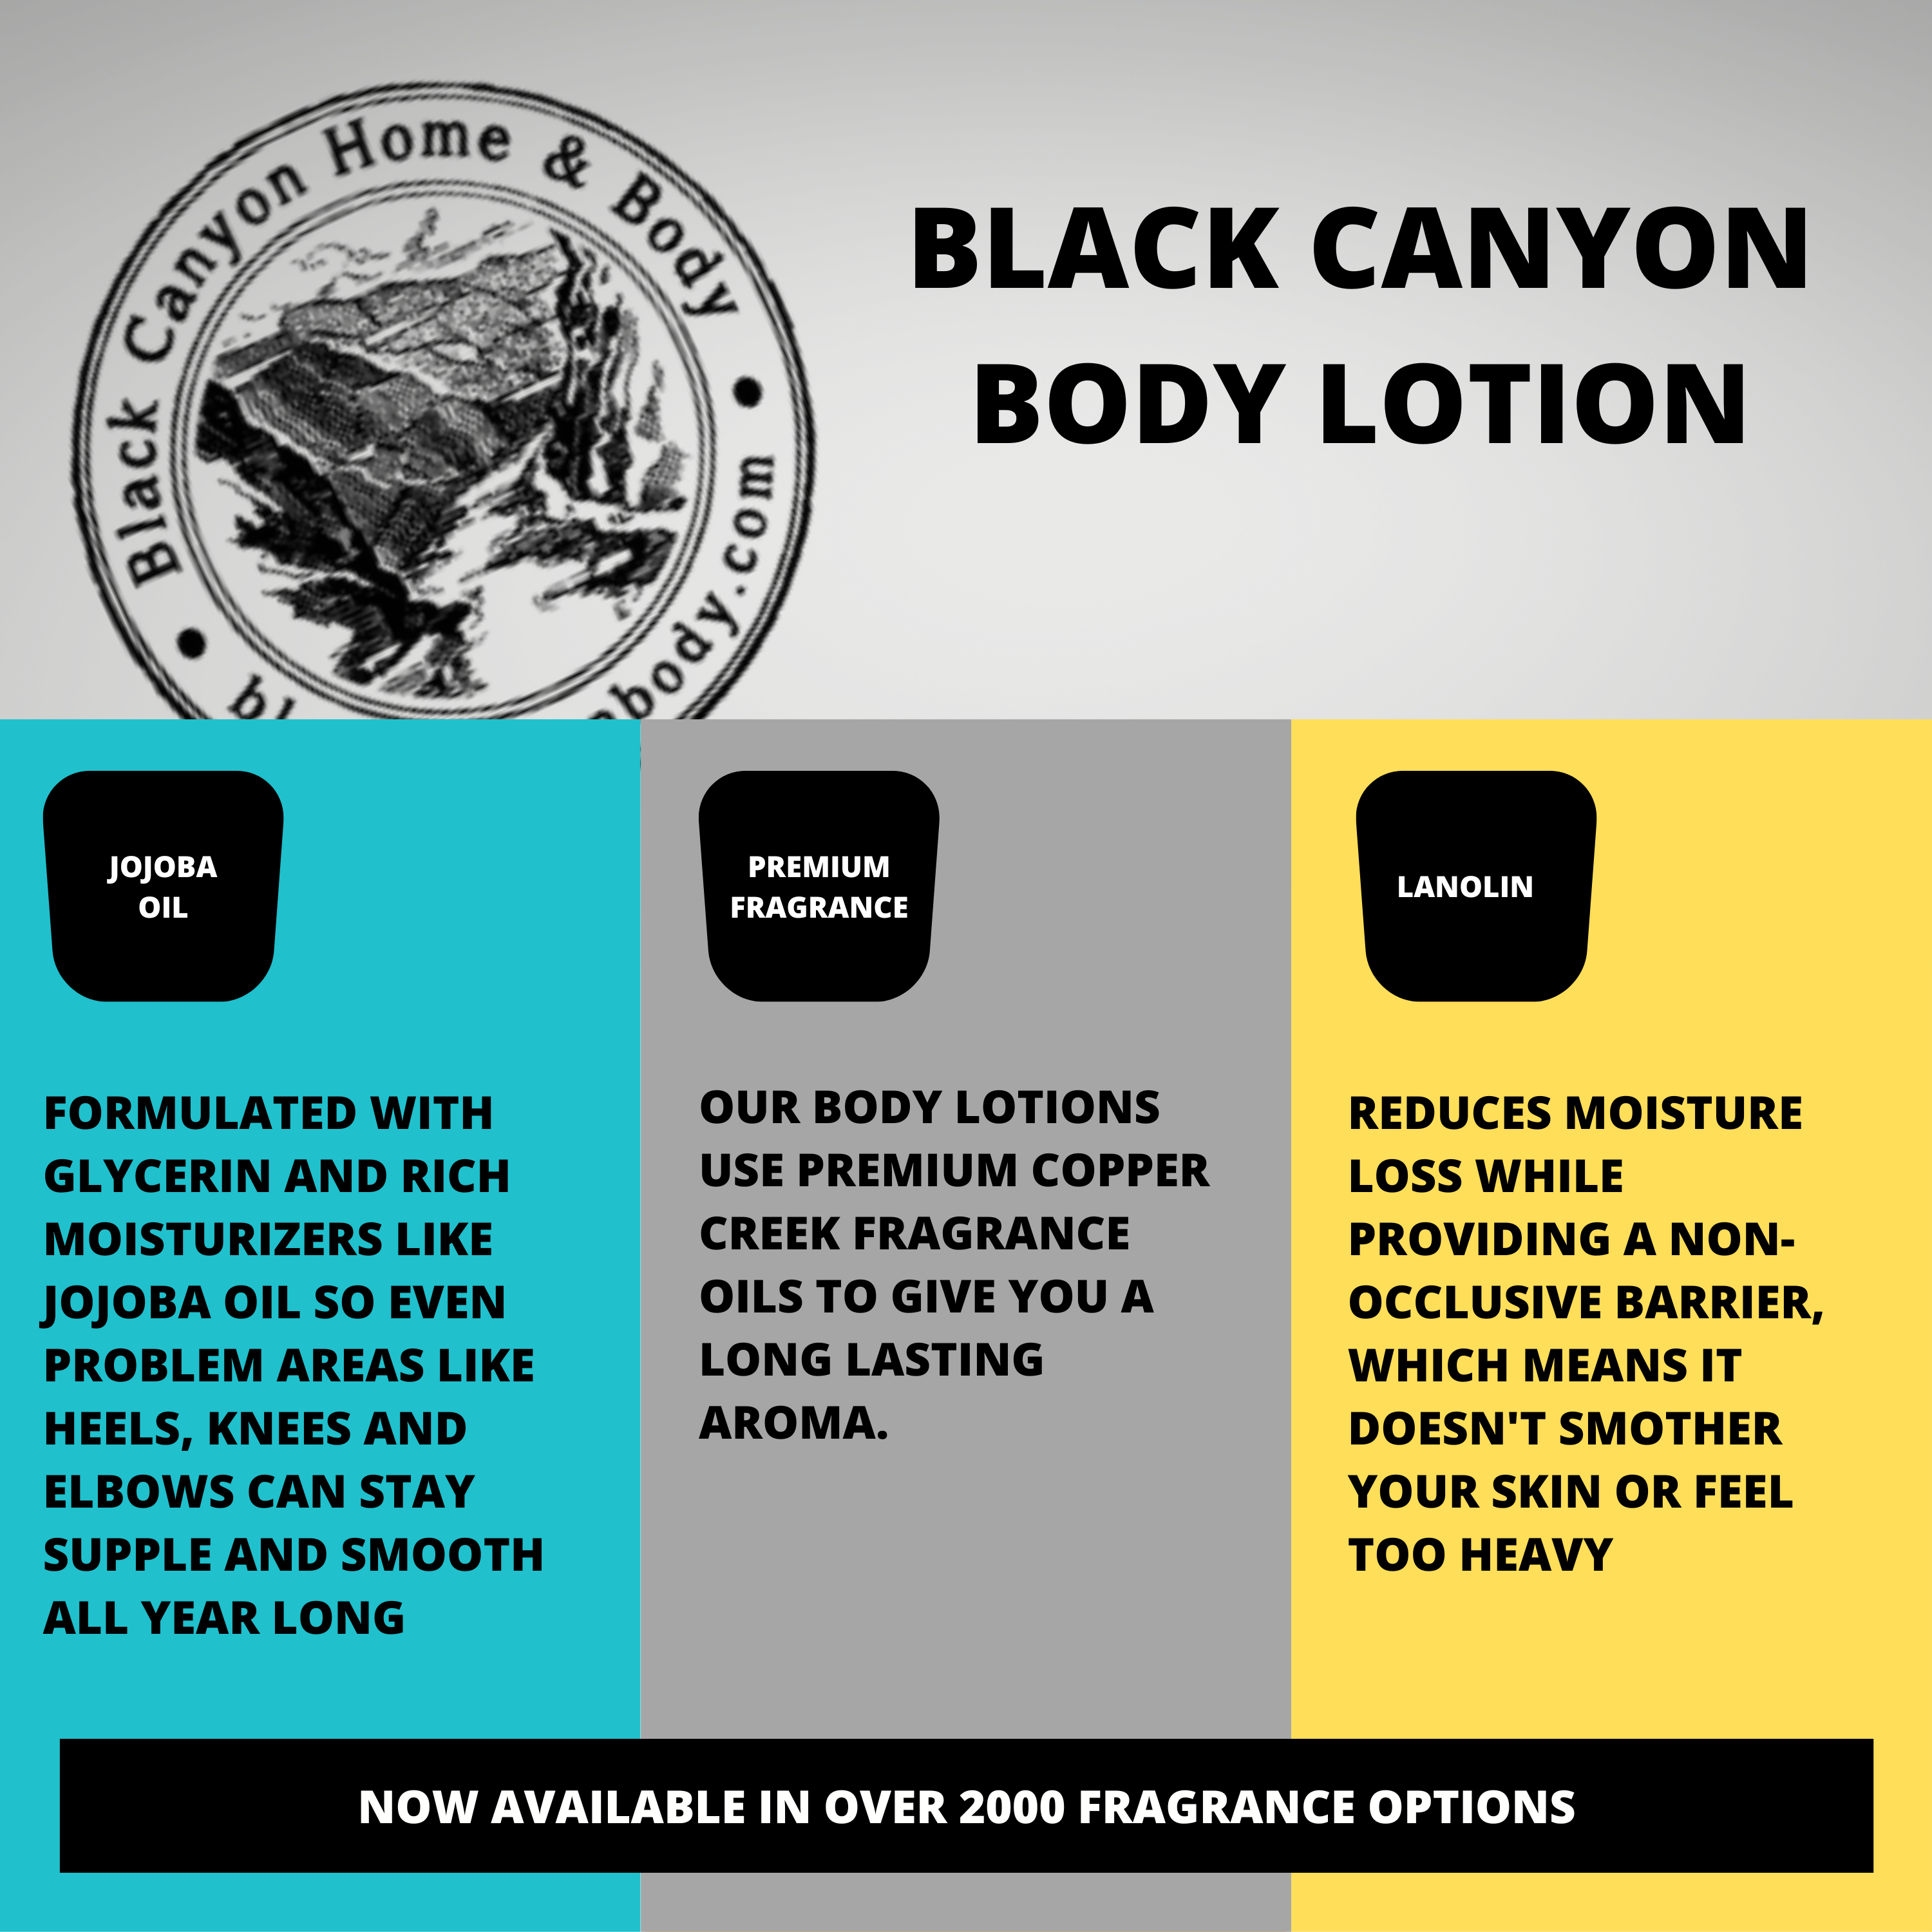 Black Canyon Apothecary Grapefruit Scented Luxury Body Lotion with Lanolin and Jojoba Oil